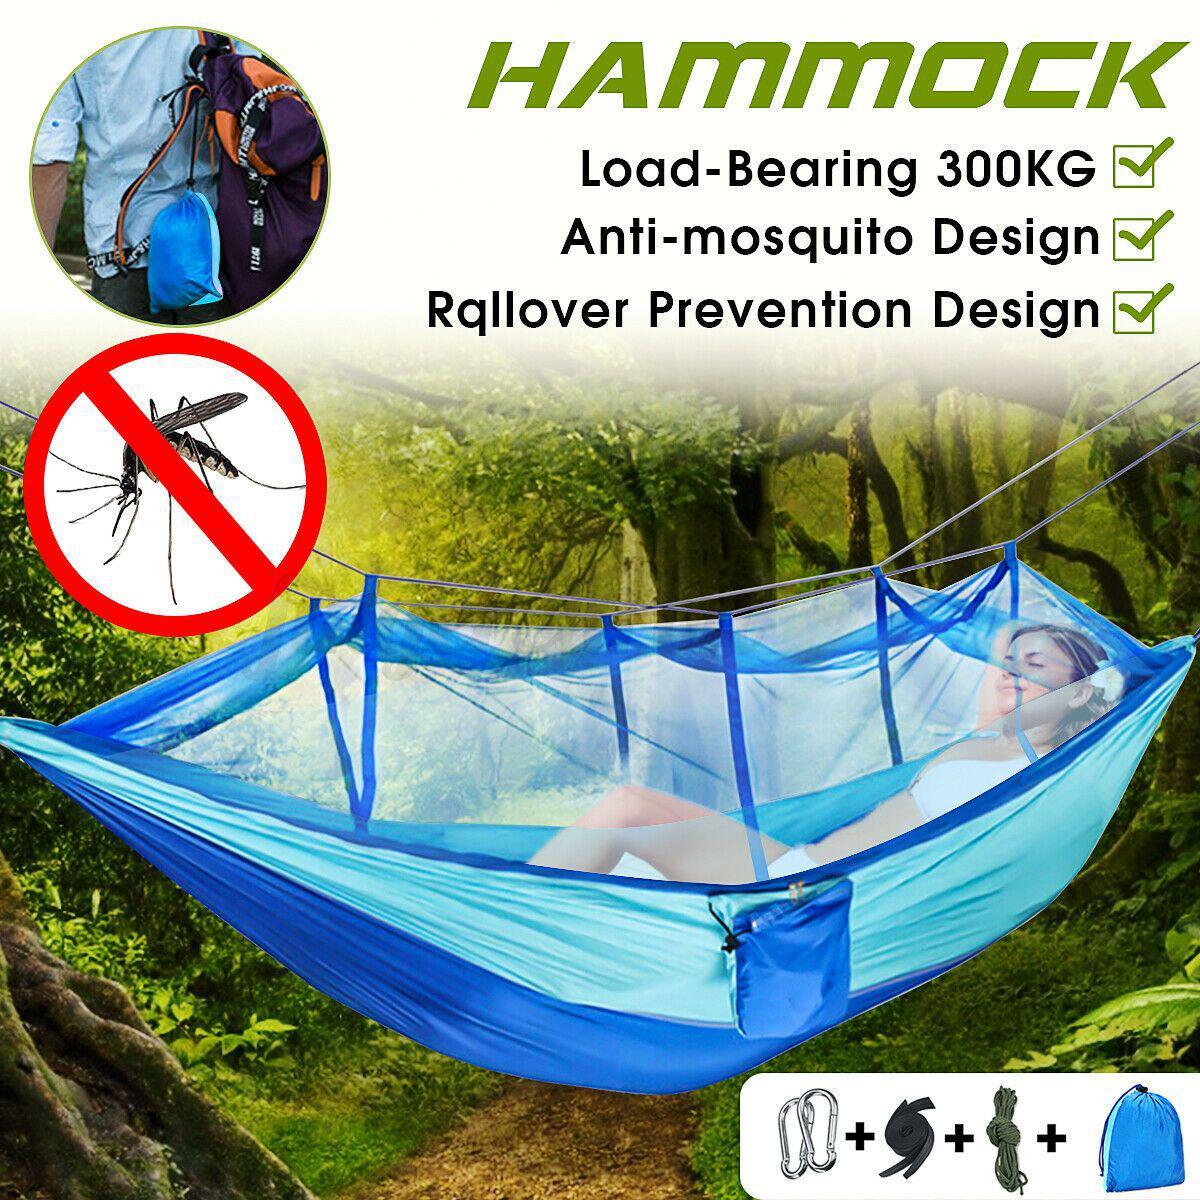 mosquito-camping-hammock-bed